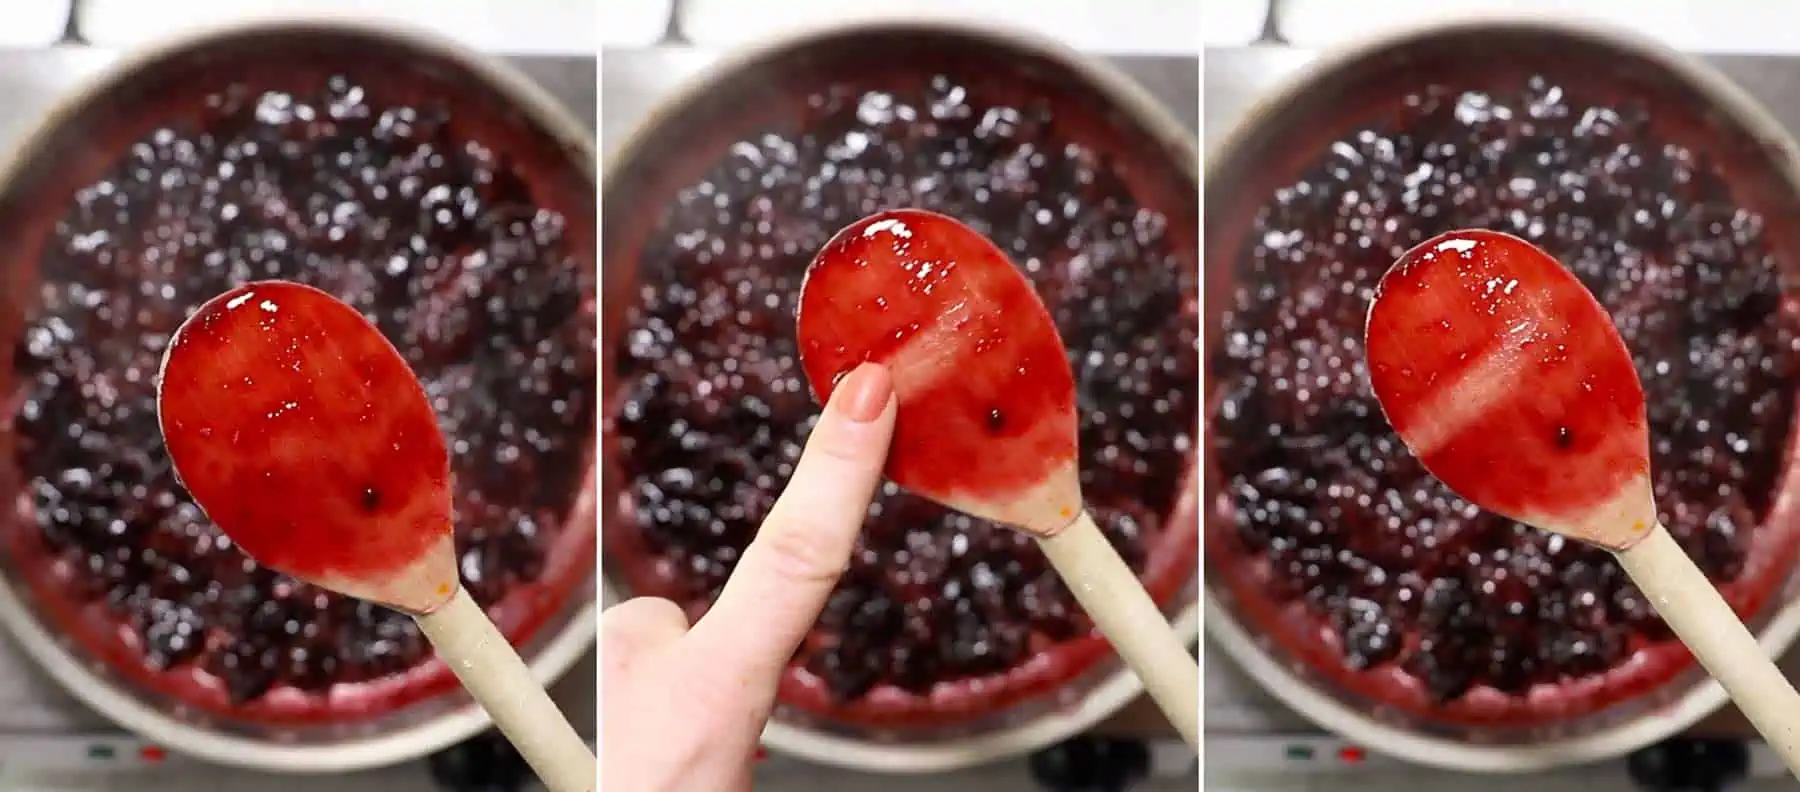 A wooden spoon dipped in cherry compote.